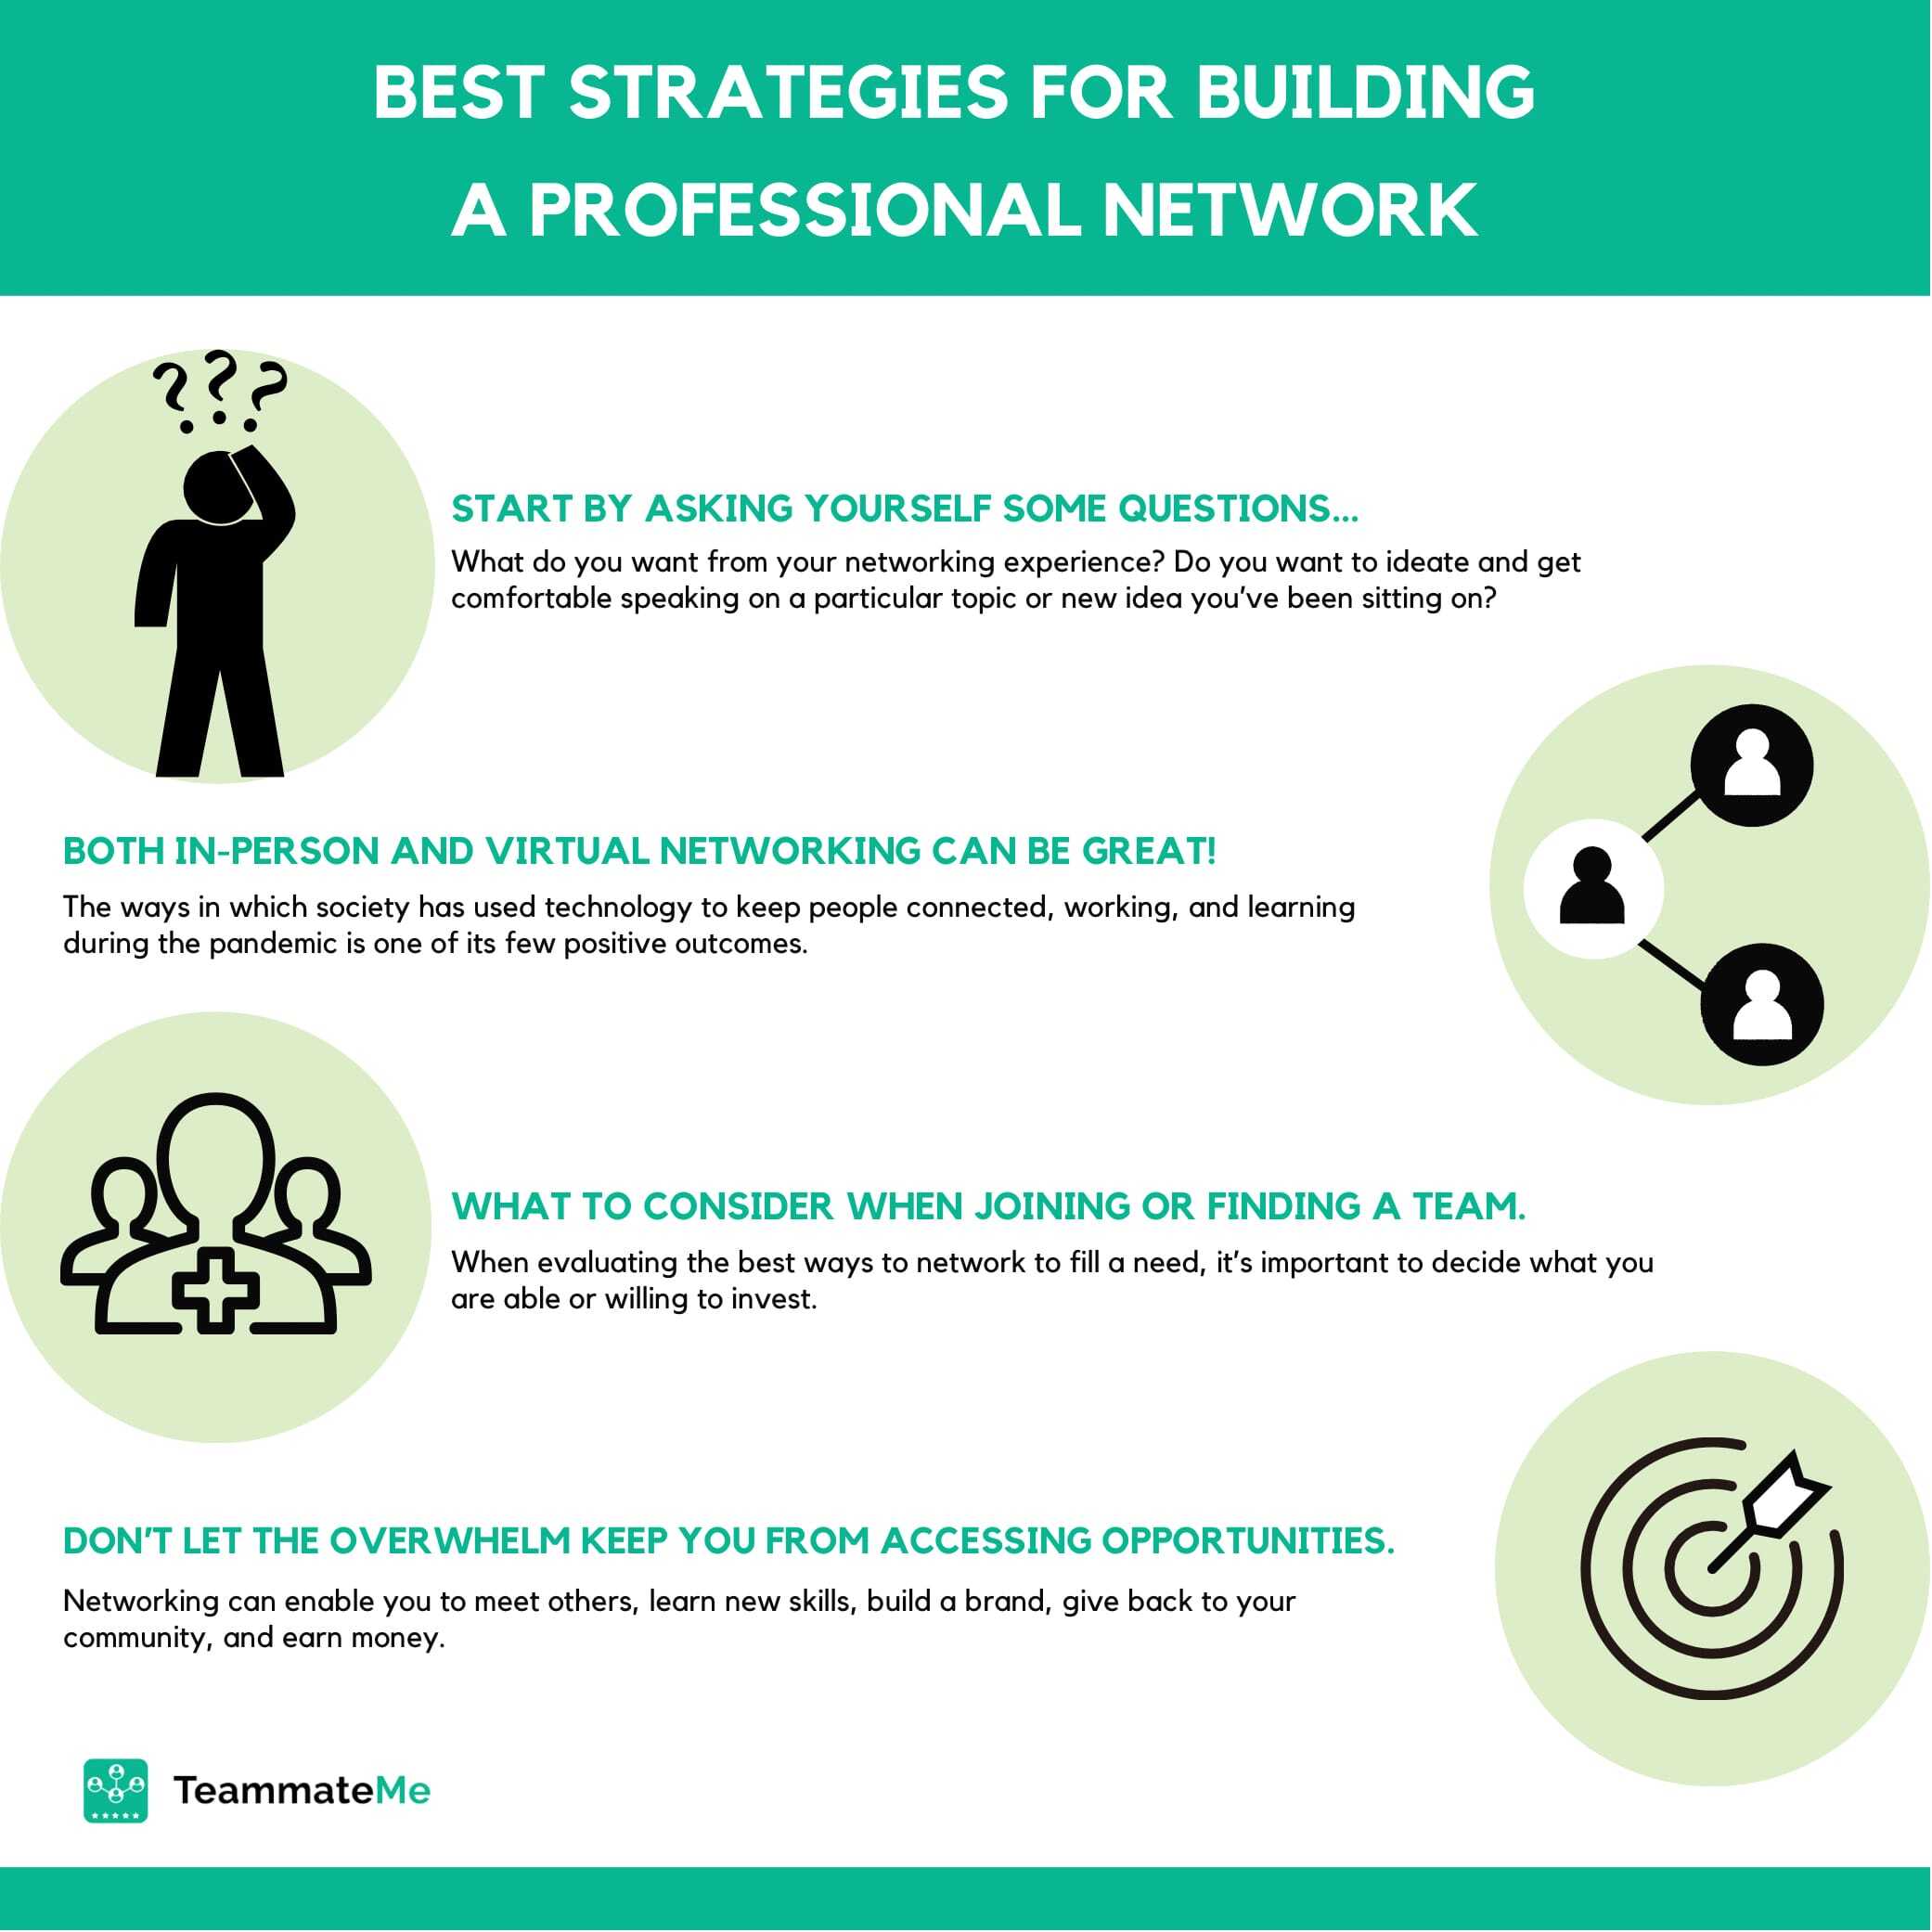 Best strategies for building a professional network - Infographic